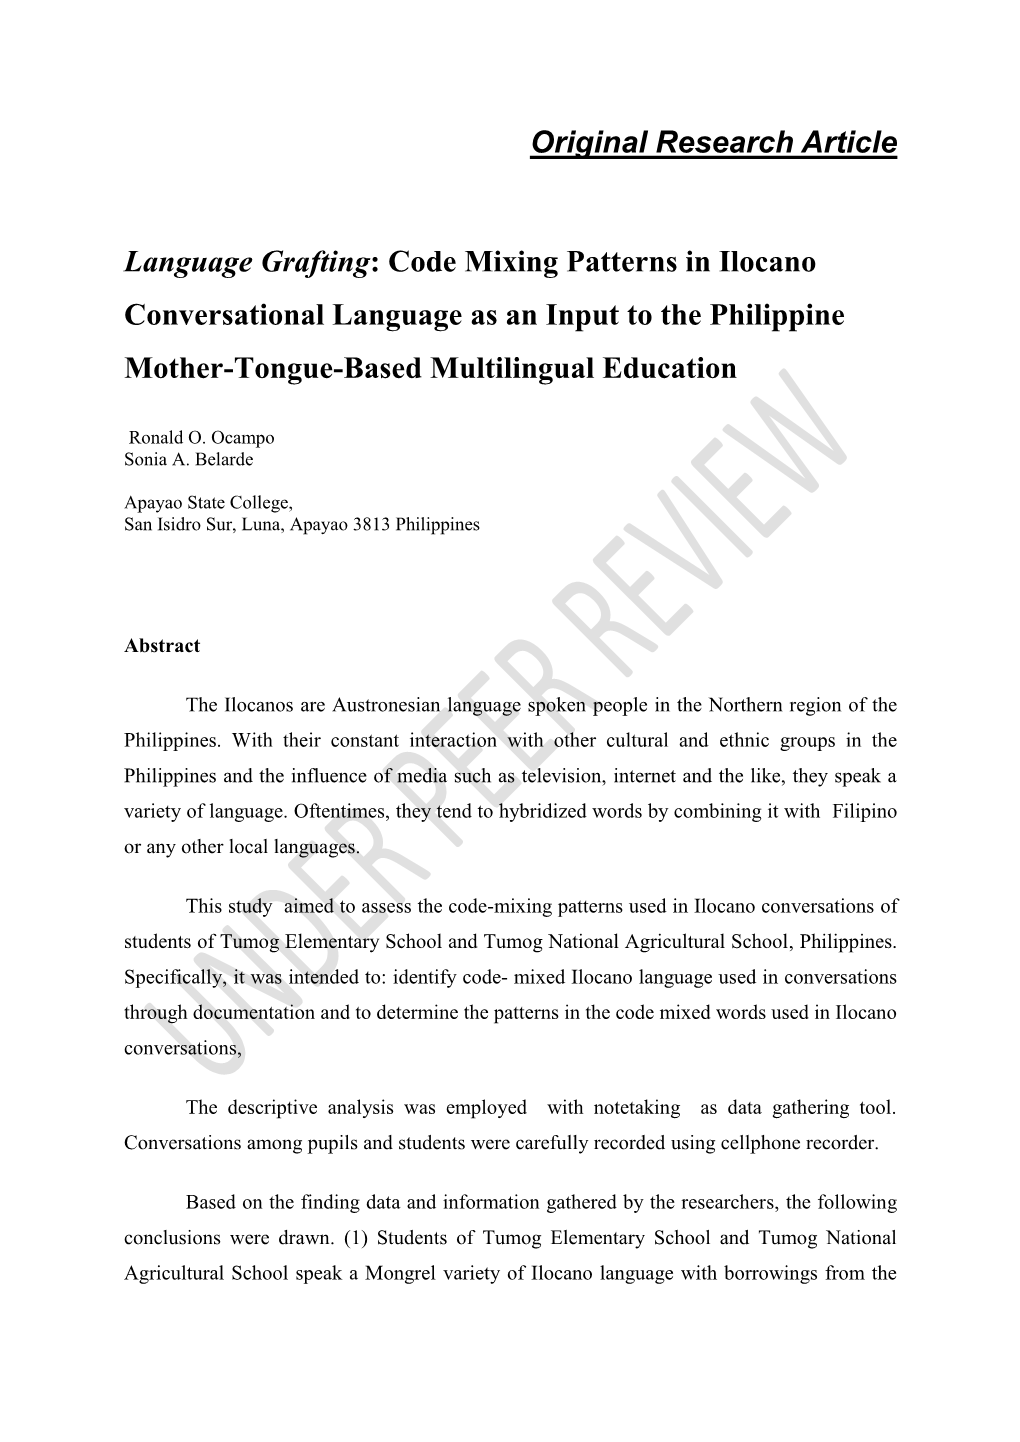 Code Mixing Patterns in Ilocano Conversational Language As an Input to the Philippine Mother-Tongue-Based Multilingual Education